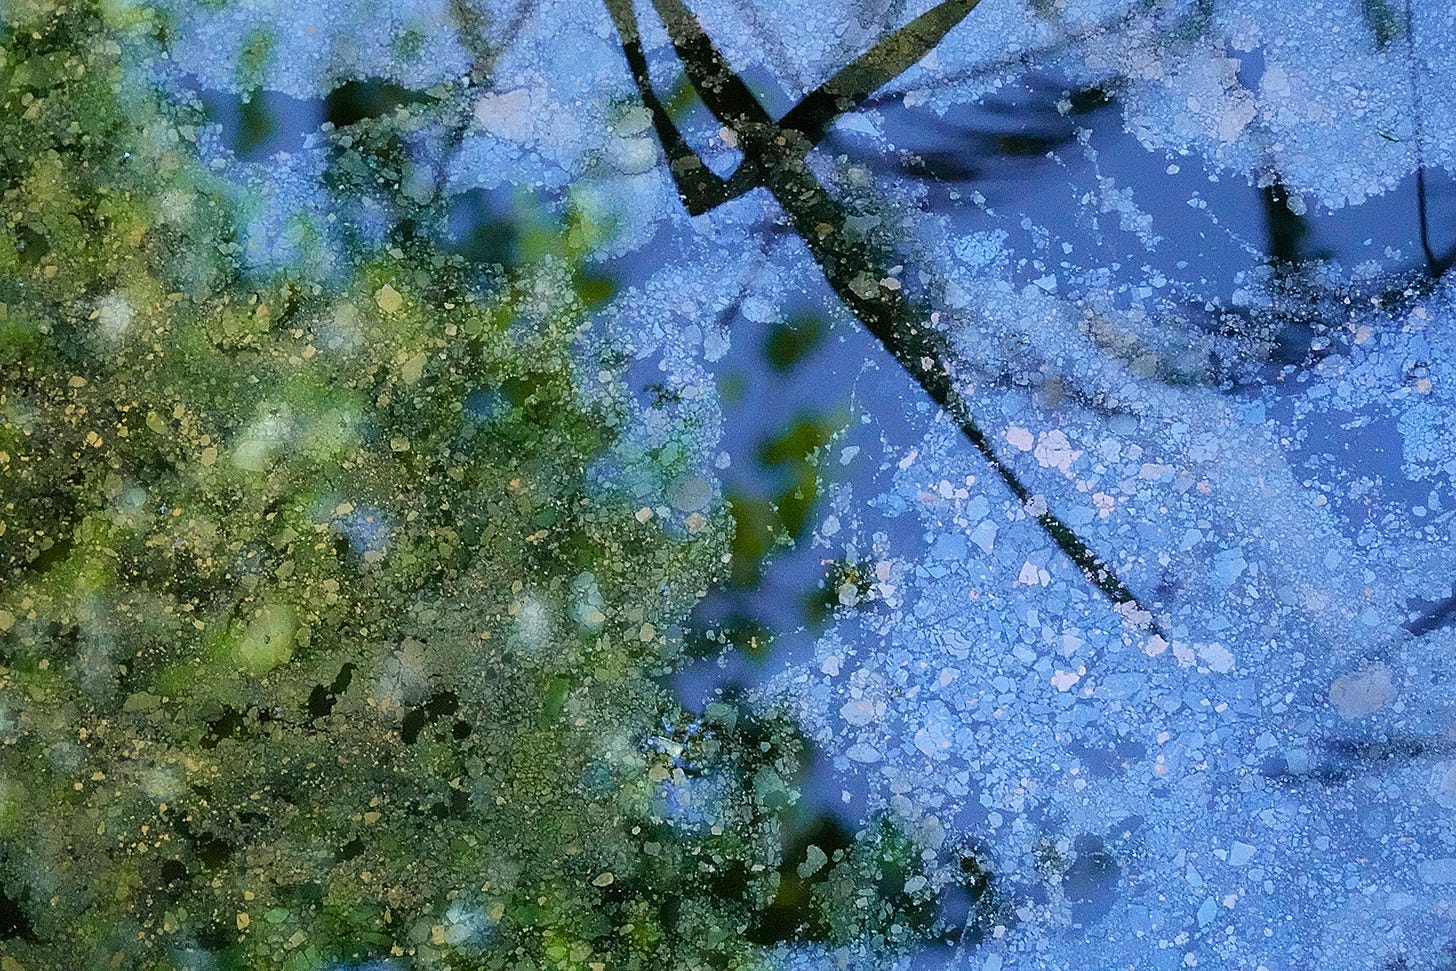 Fragmented biofilm on the surface of shallowing ditch water reflects dark green rushes, sap green birch leaves and an azure blue sky